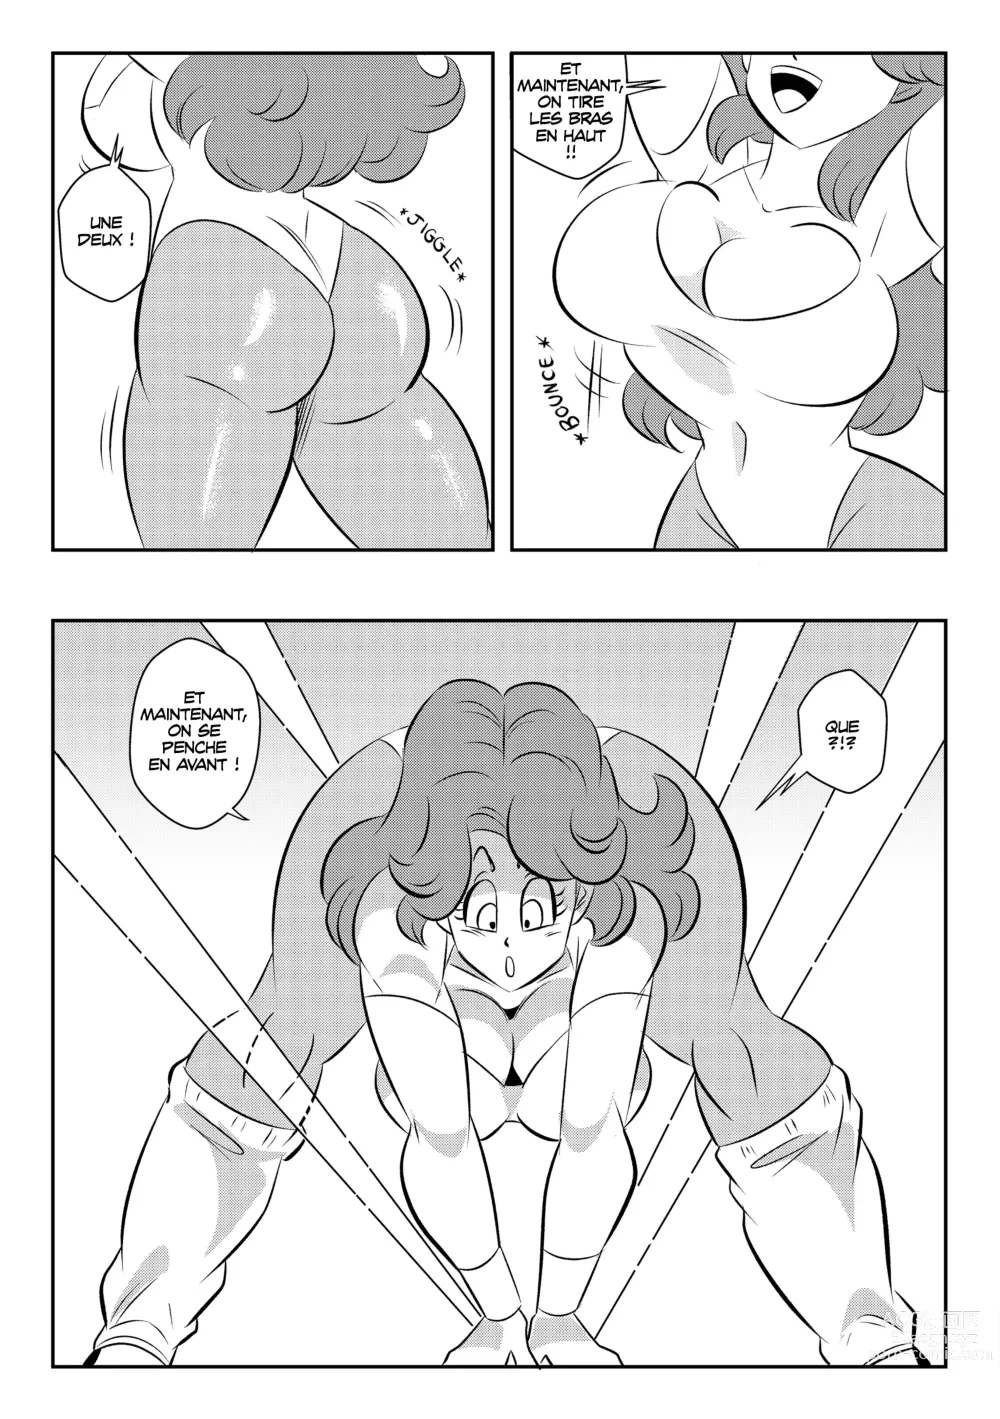 Page 4 of doujinshi perfect broascast